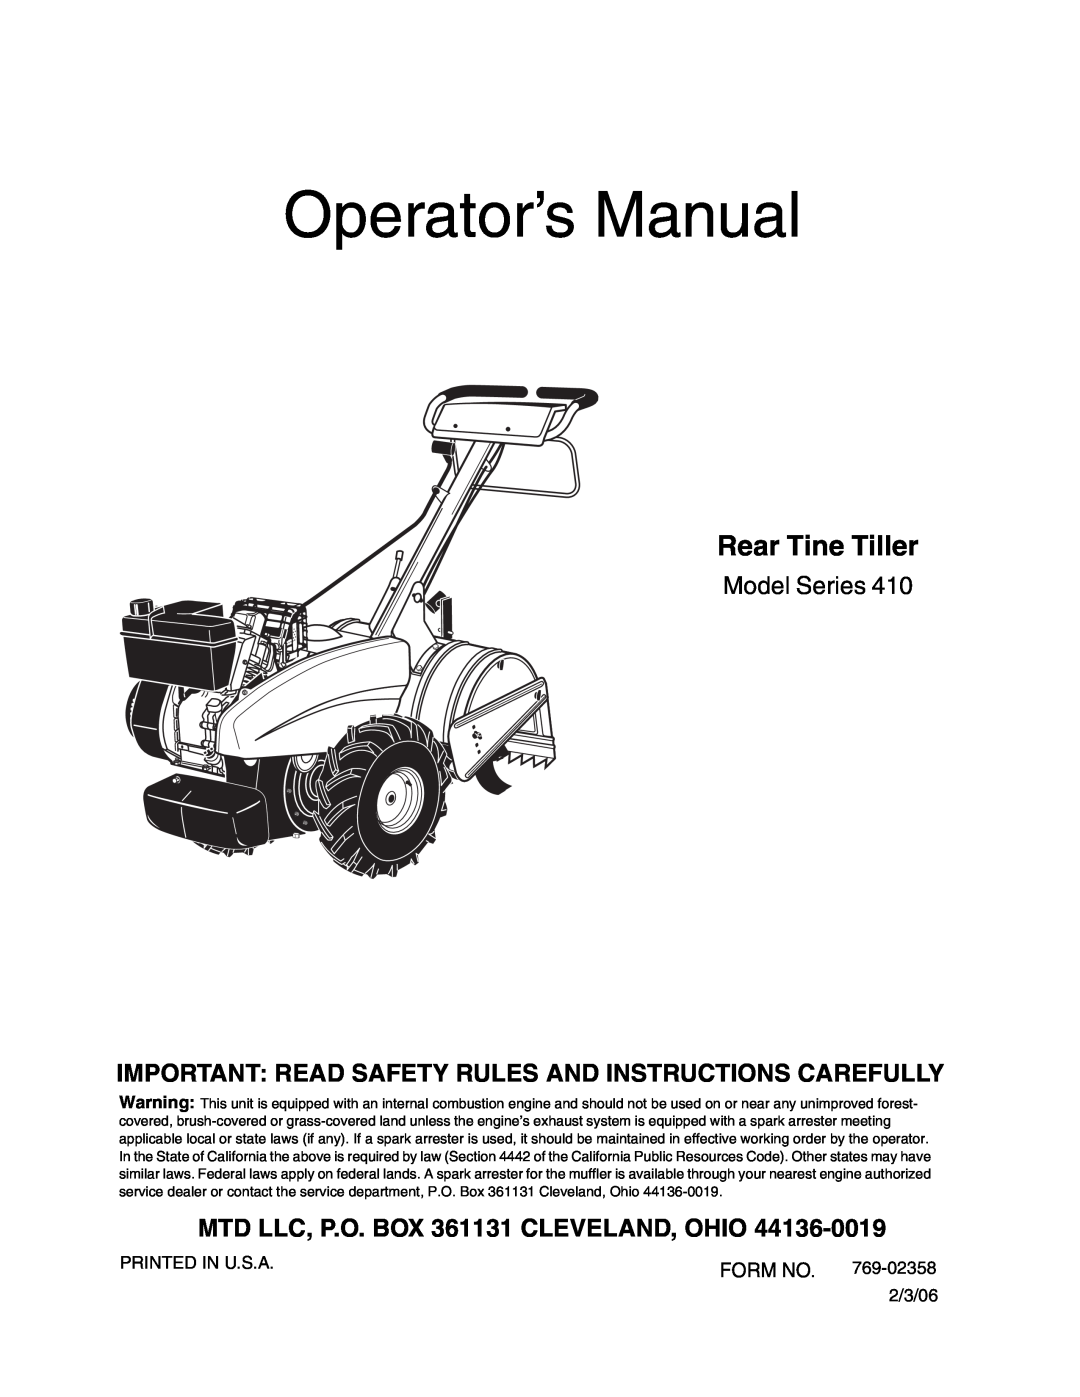 MTD 428C manual Operator’s Manual, Rear Tine Tiller, Model Series, Important Read Safety Rules And Instructions Carefully 